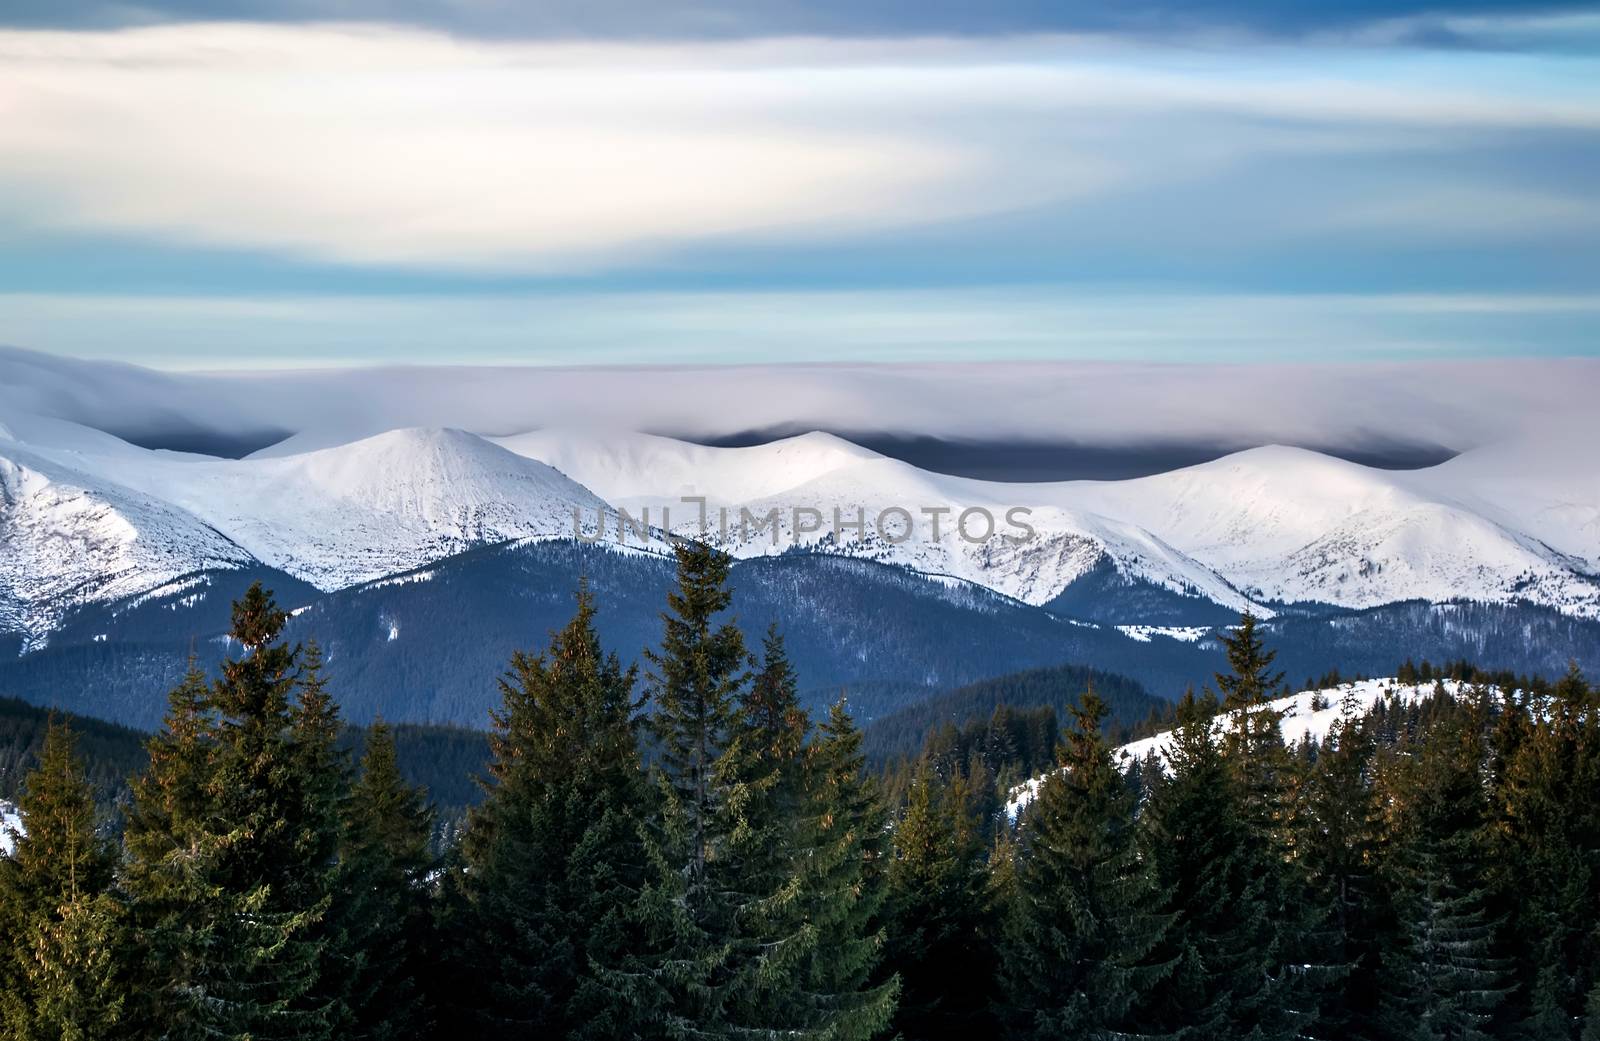 Winter landscape of a snowy mountain range under dark heavy clouds. Dramatic skyline. Green trees in the foreground